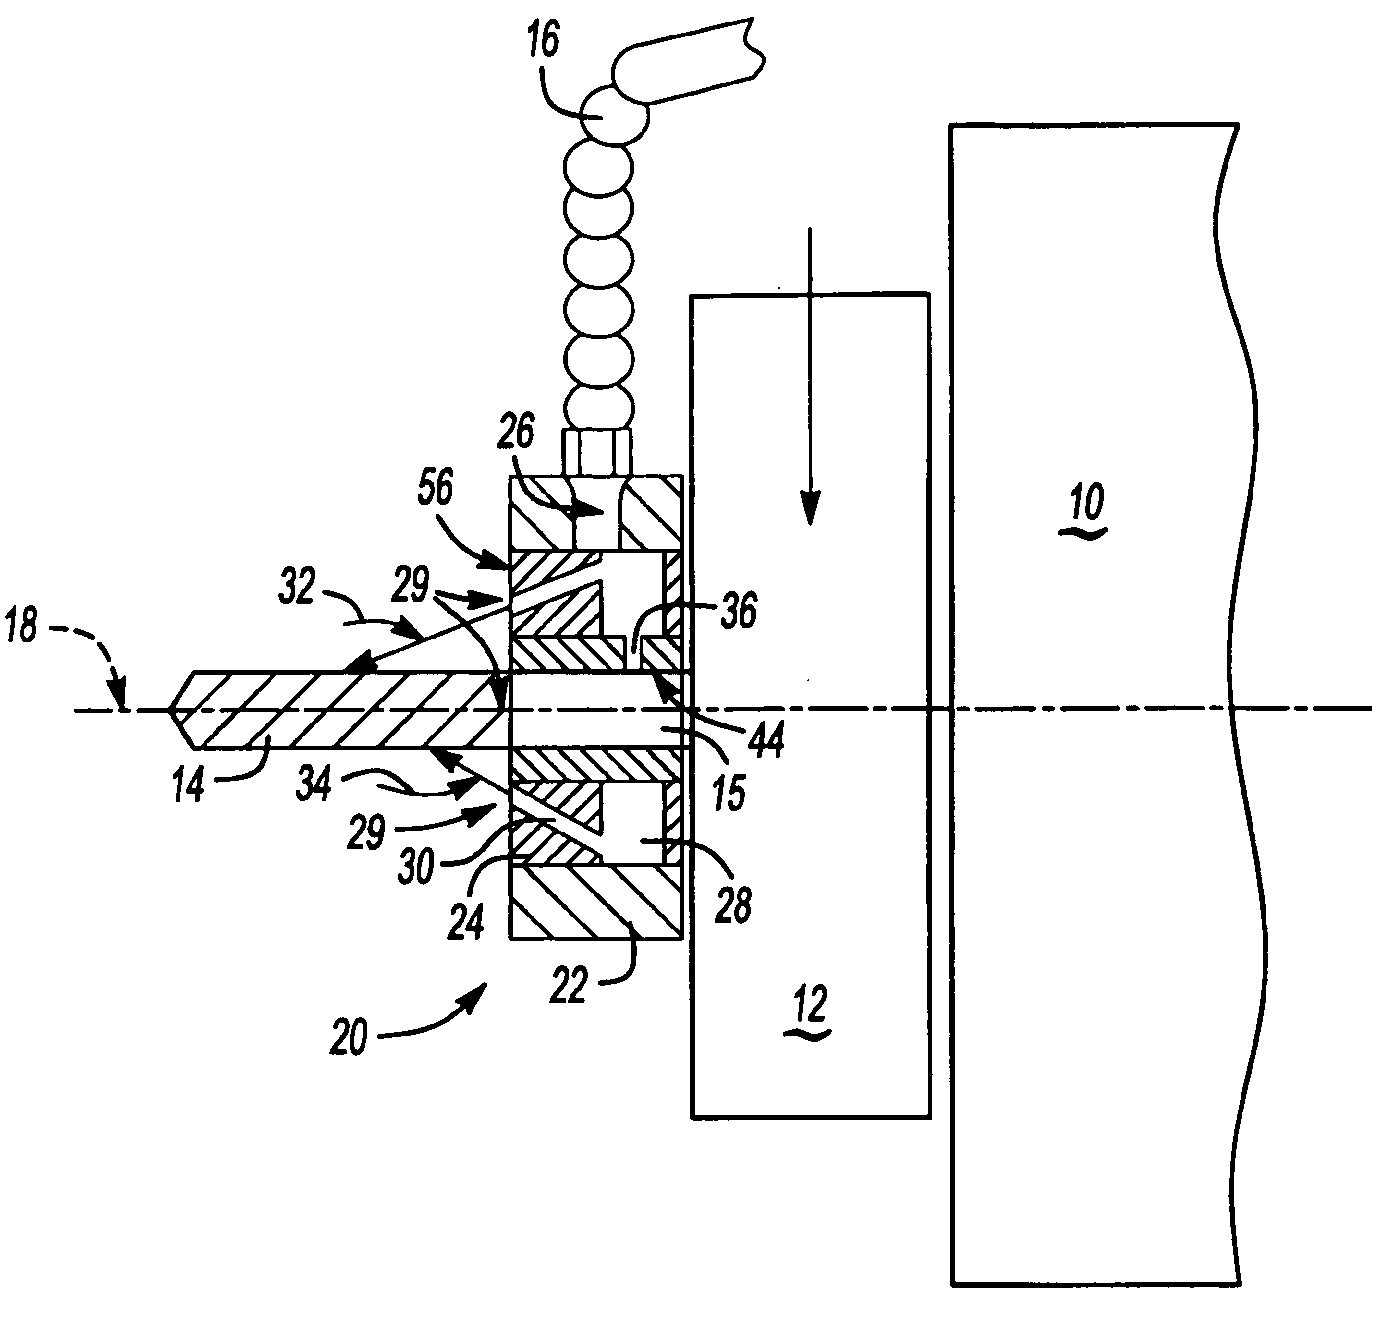 Tool coolant application and direction assembly